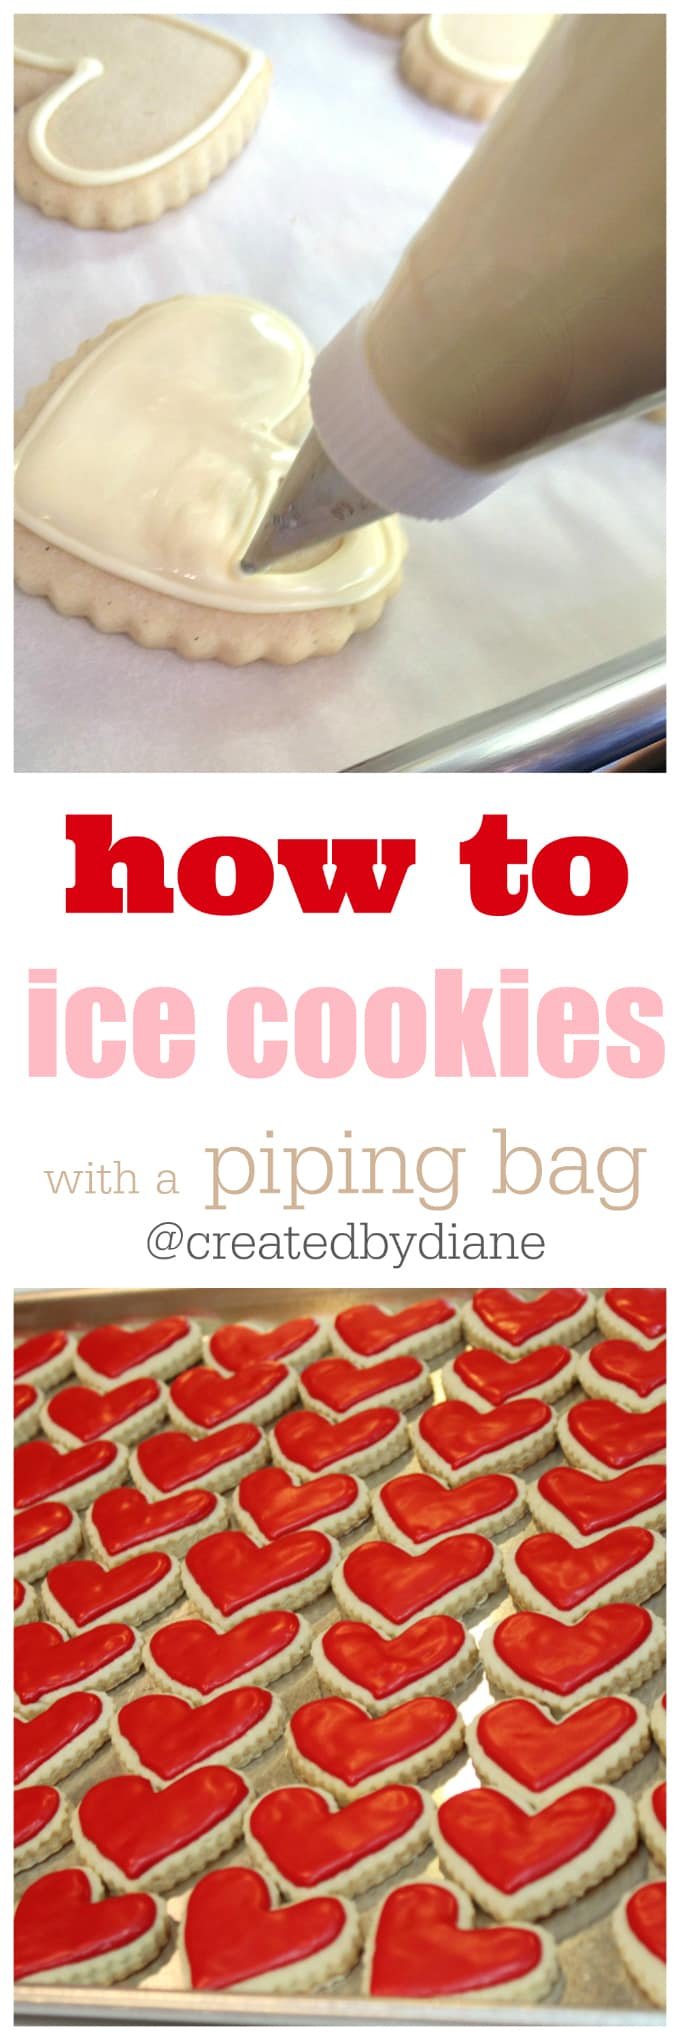 Ice Cookies With A Piping Bag